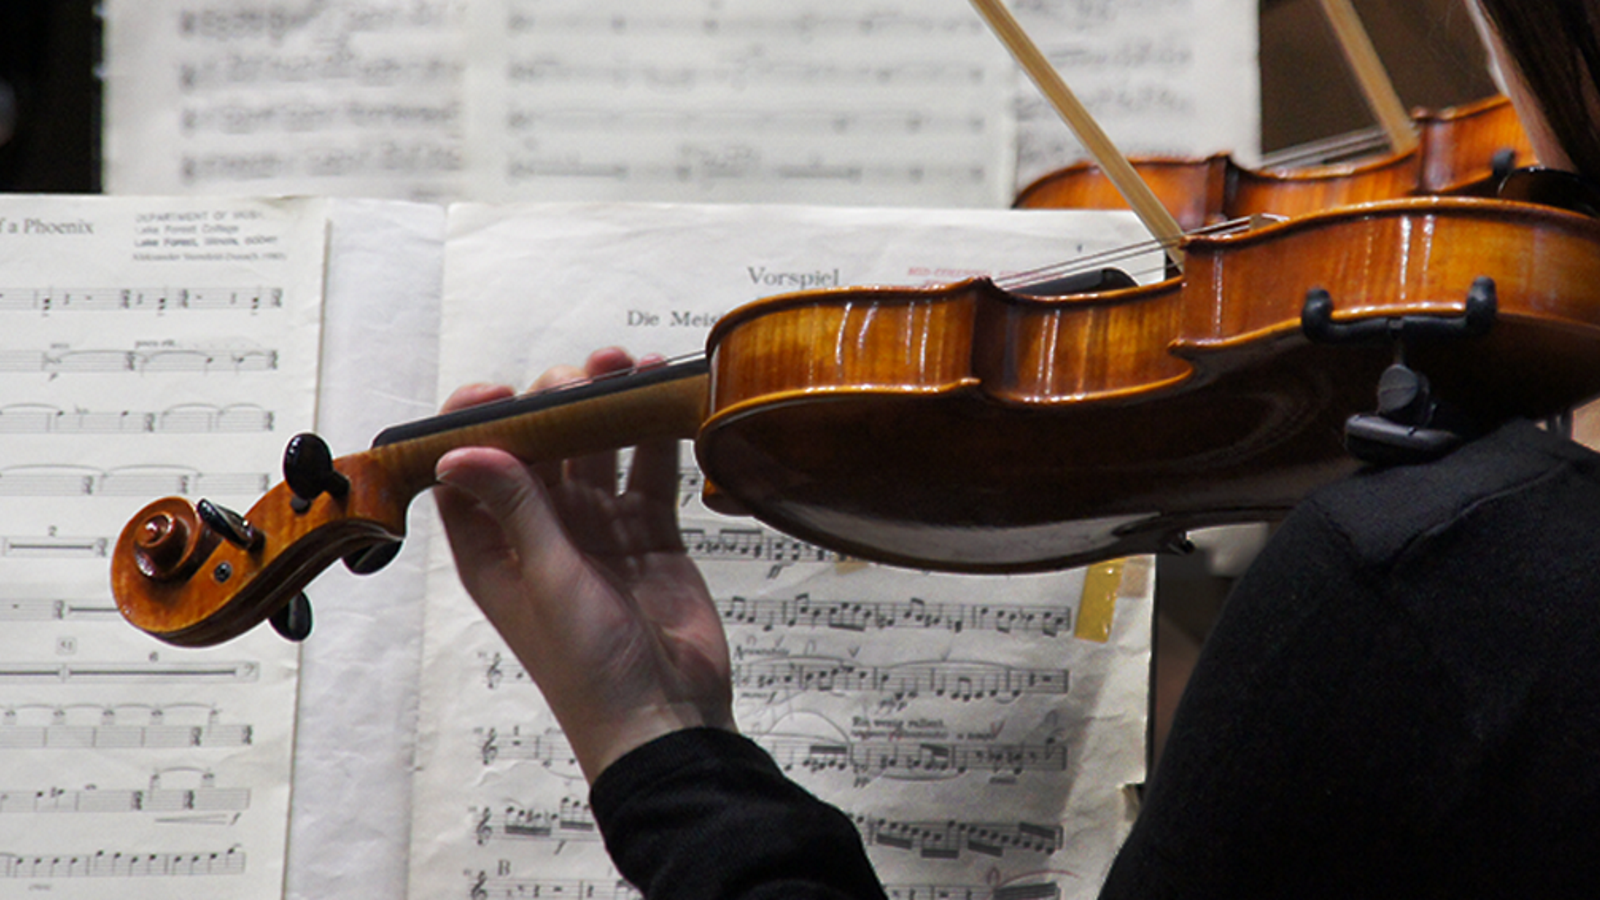 a violin being played in front of sheet music